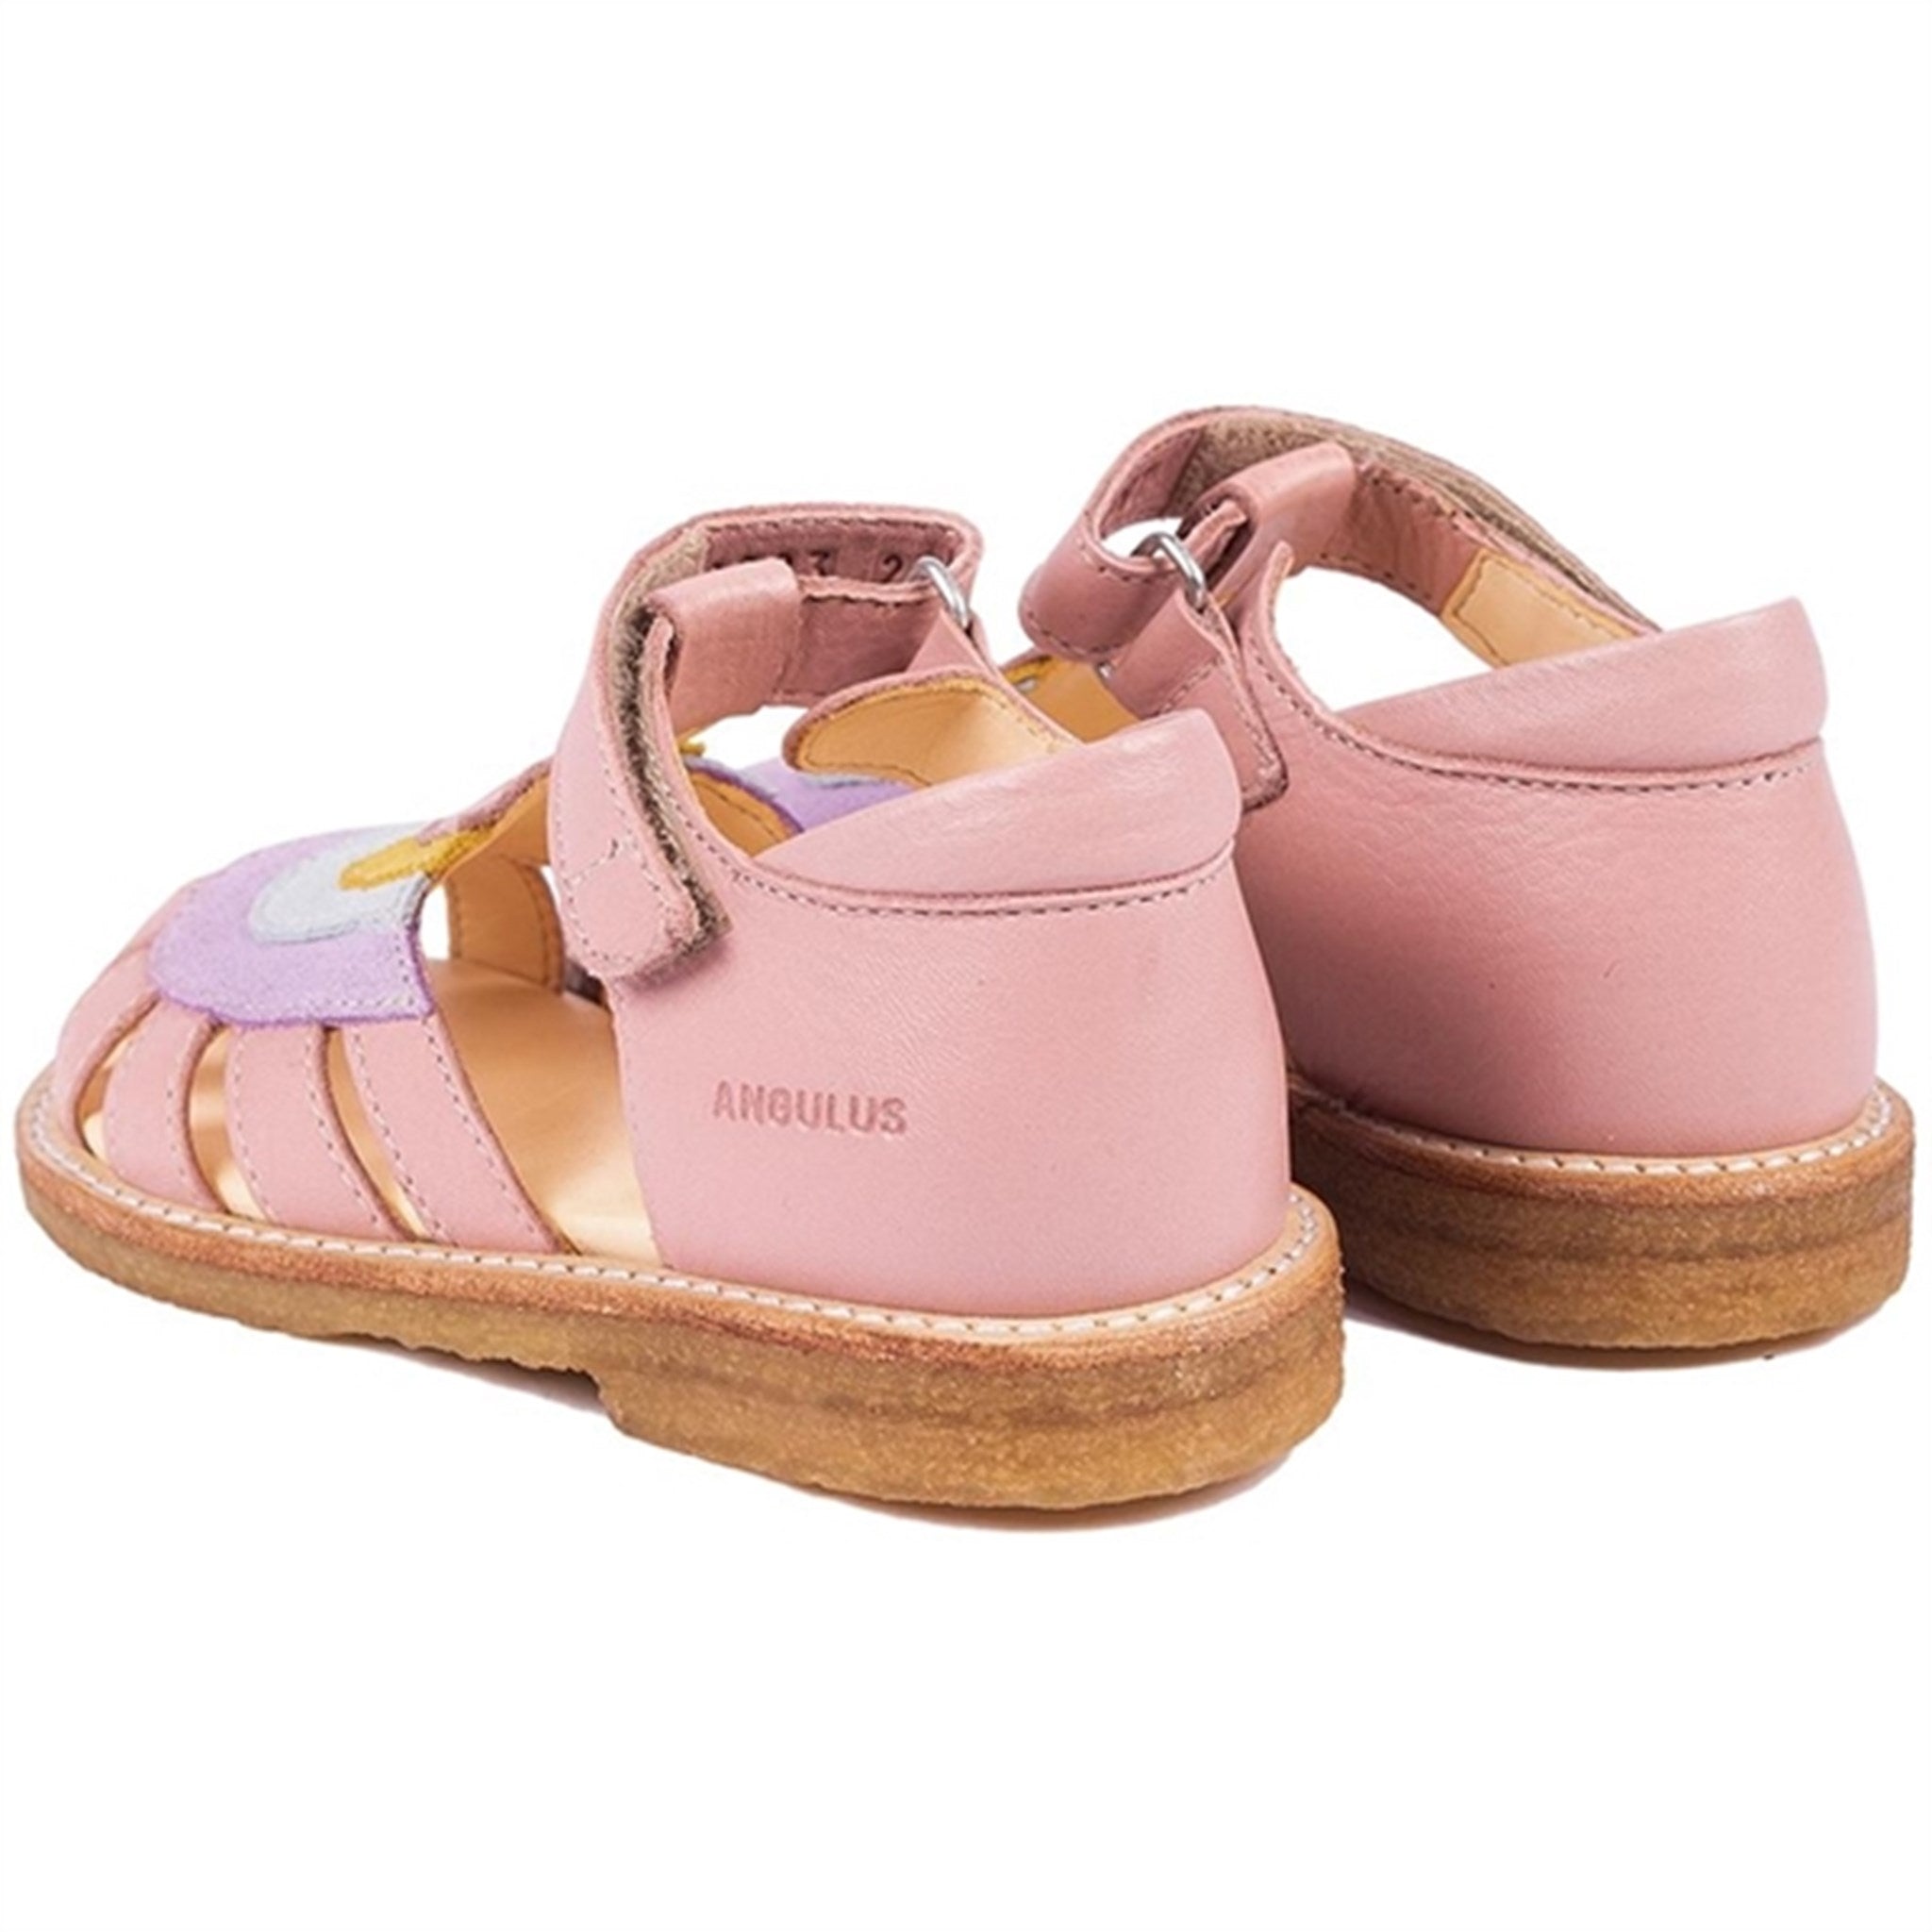 Angulus Sandals Rose/Lilac/Ice Blue/Pineapple 3